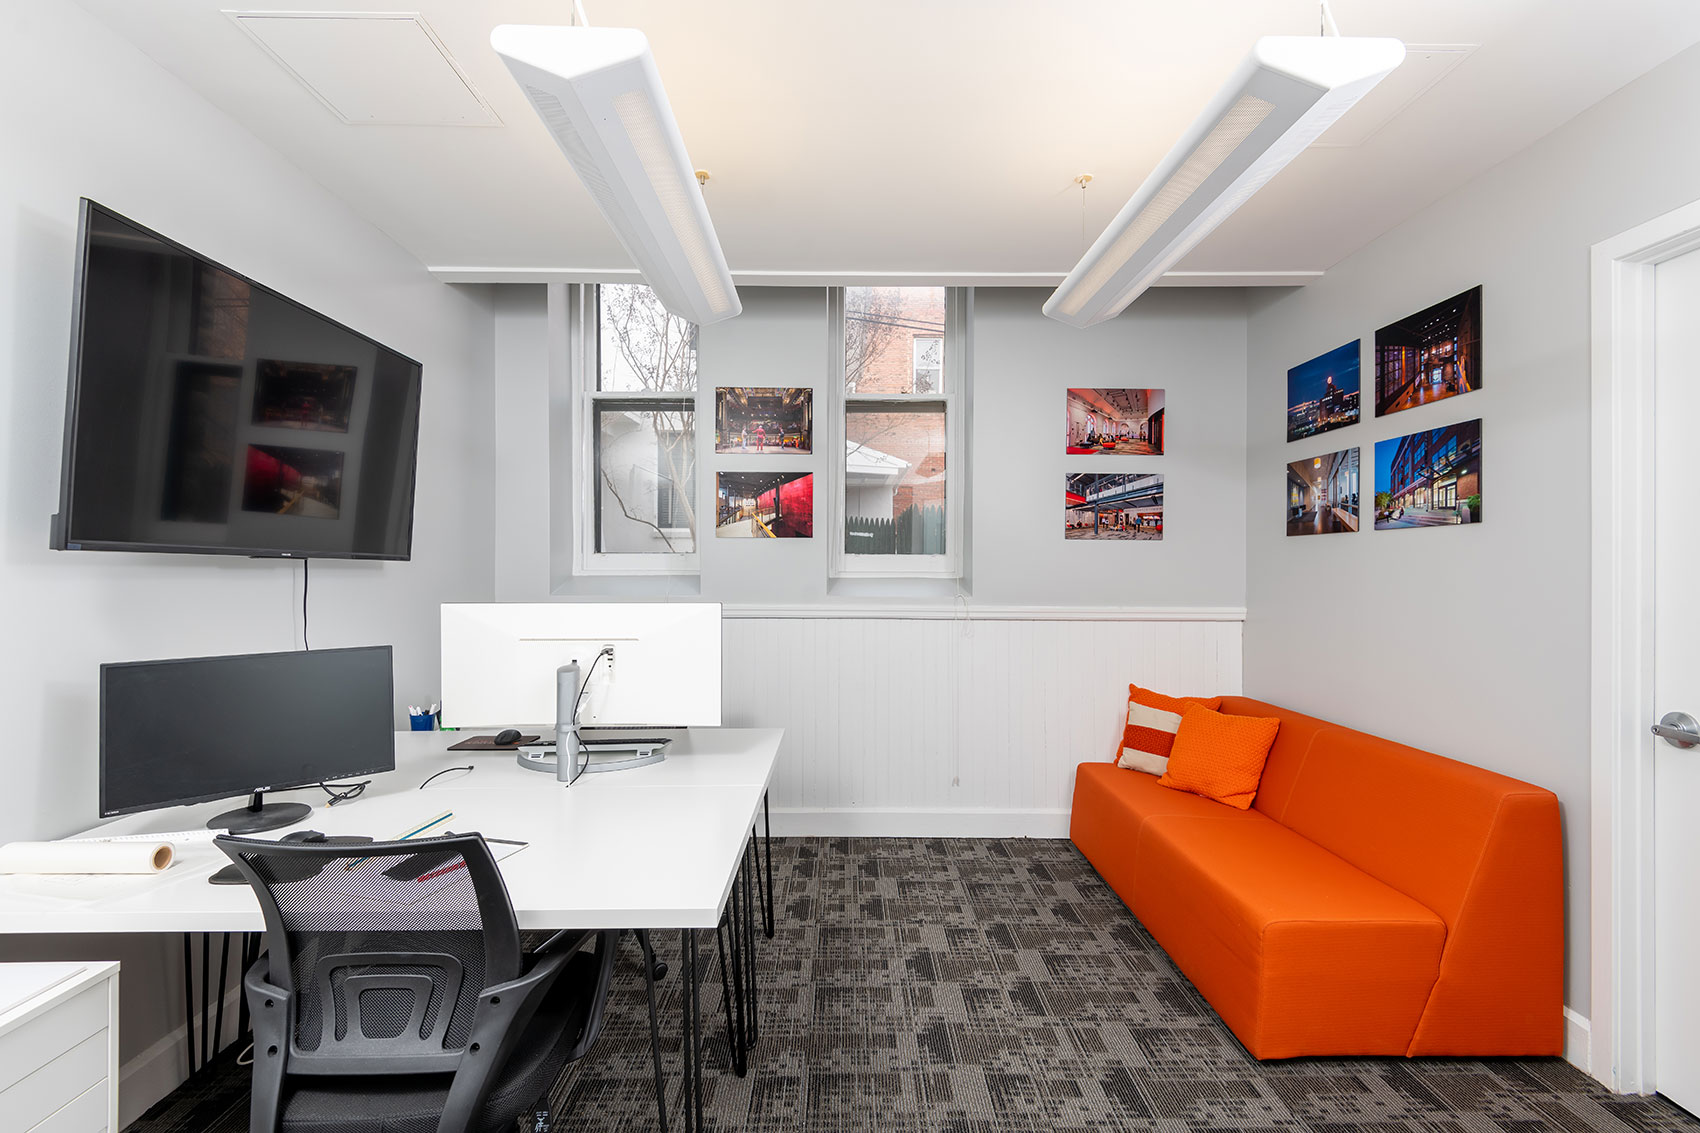 You can make your office your own with complete customizability including the ability to paint, add logos, decorate, and bring in your own furniture and technology.